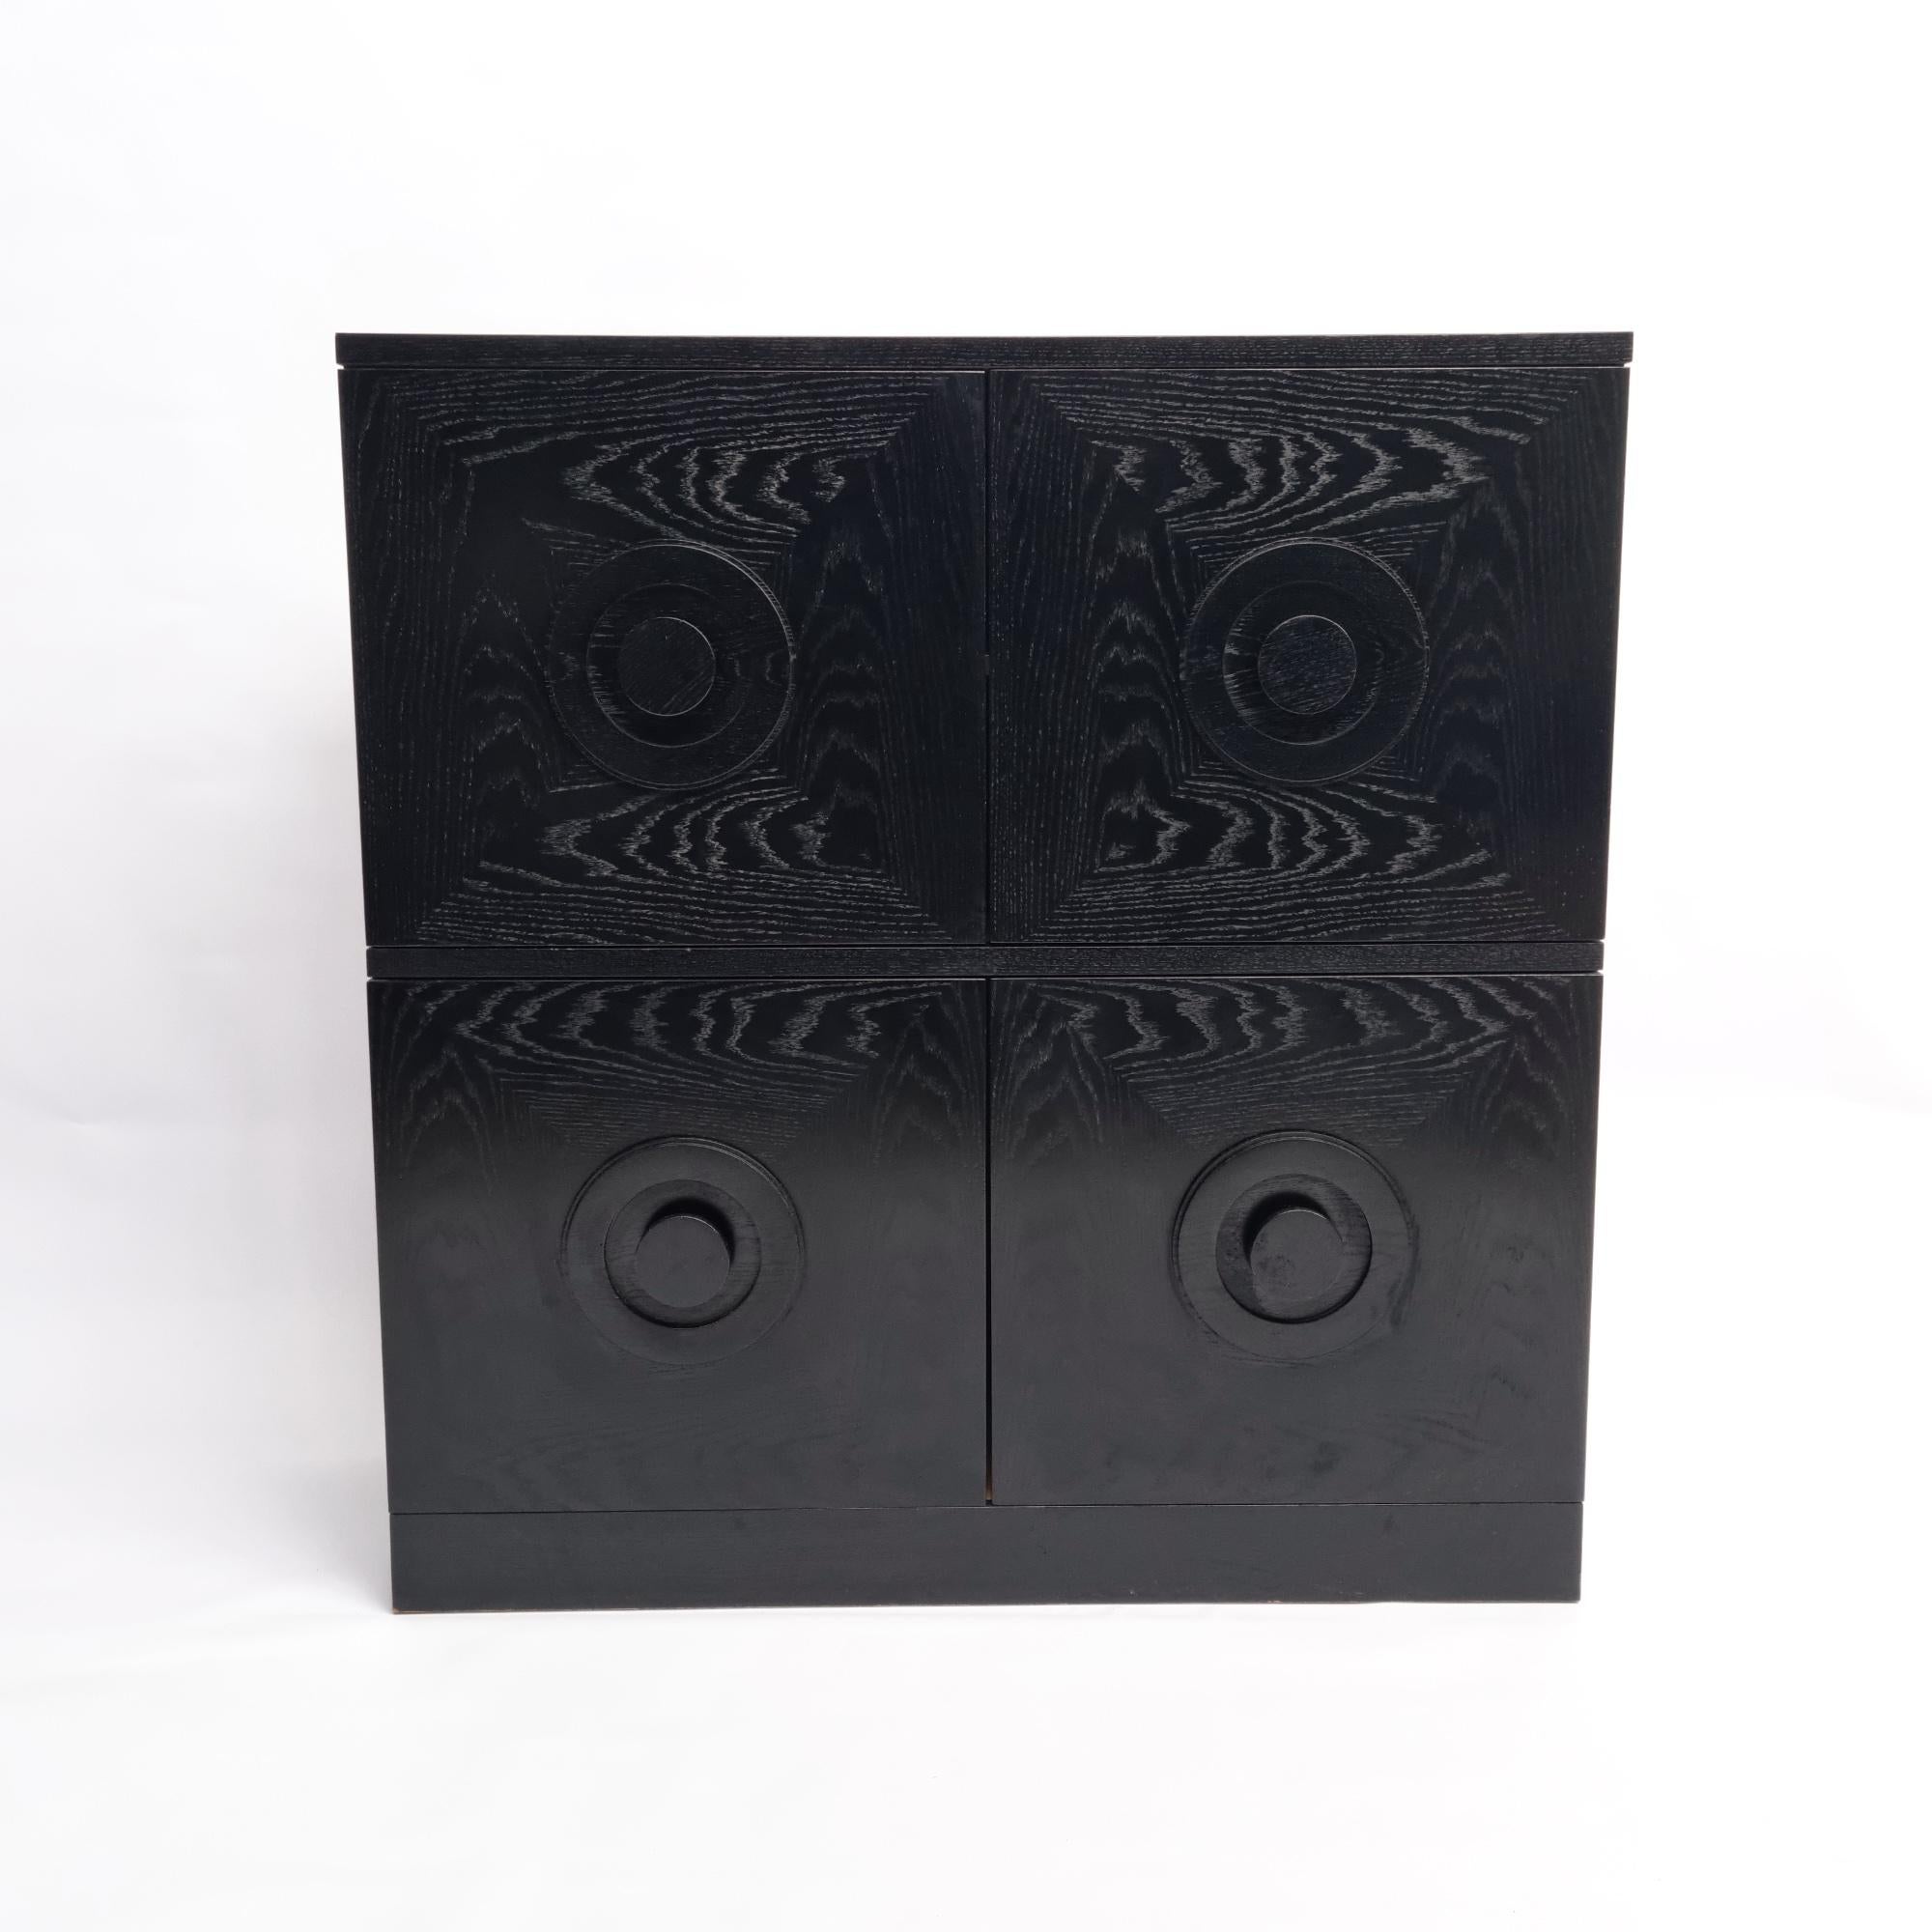 Black Brutalist cabinet in black lacquered oak, Belgium 1970s. This sideboard features four graphic patterned doors. It provides plenty of storage which makes it both very functional and decorative. These cabinets are often attributed to Belgian